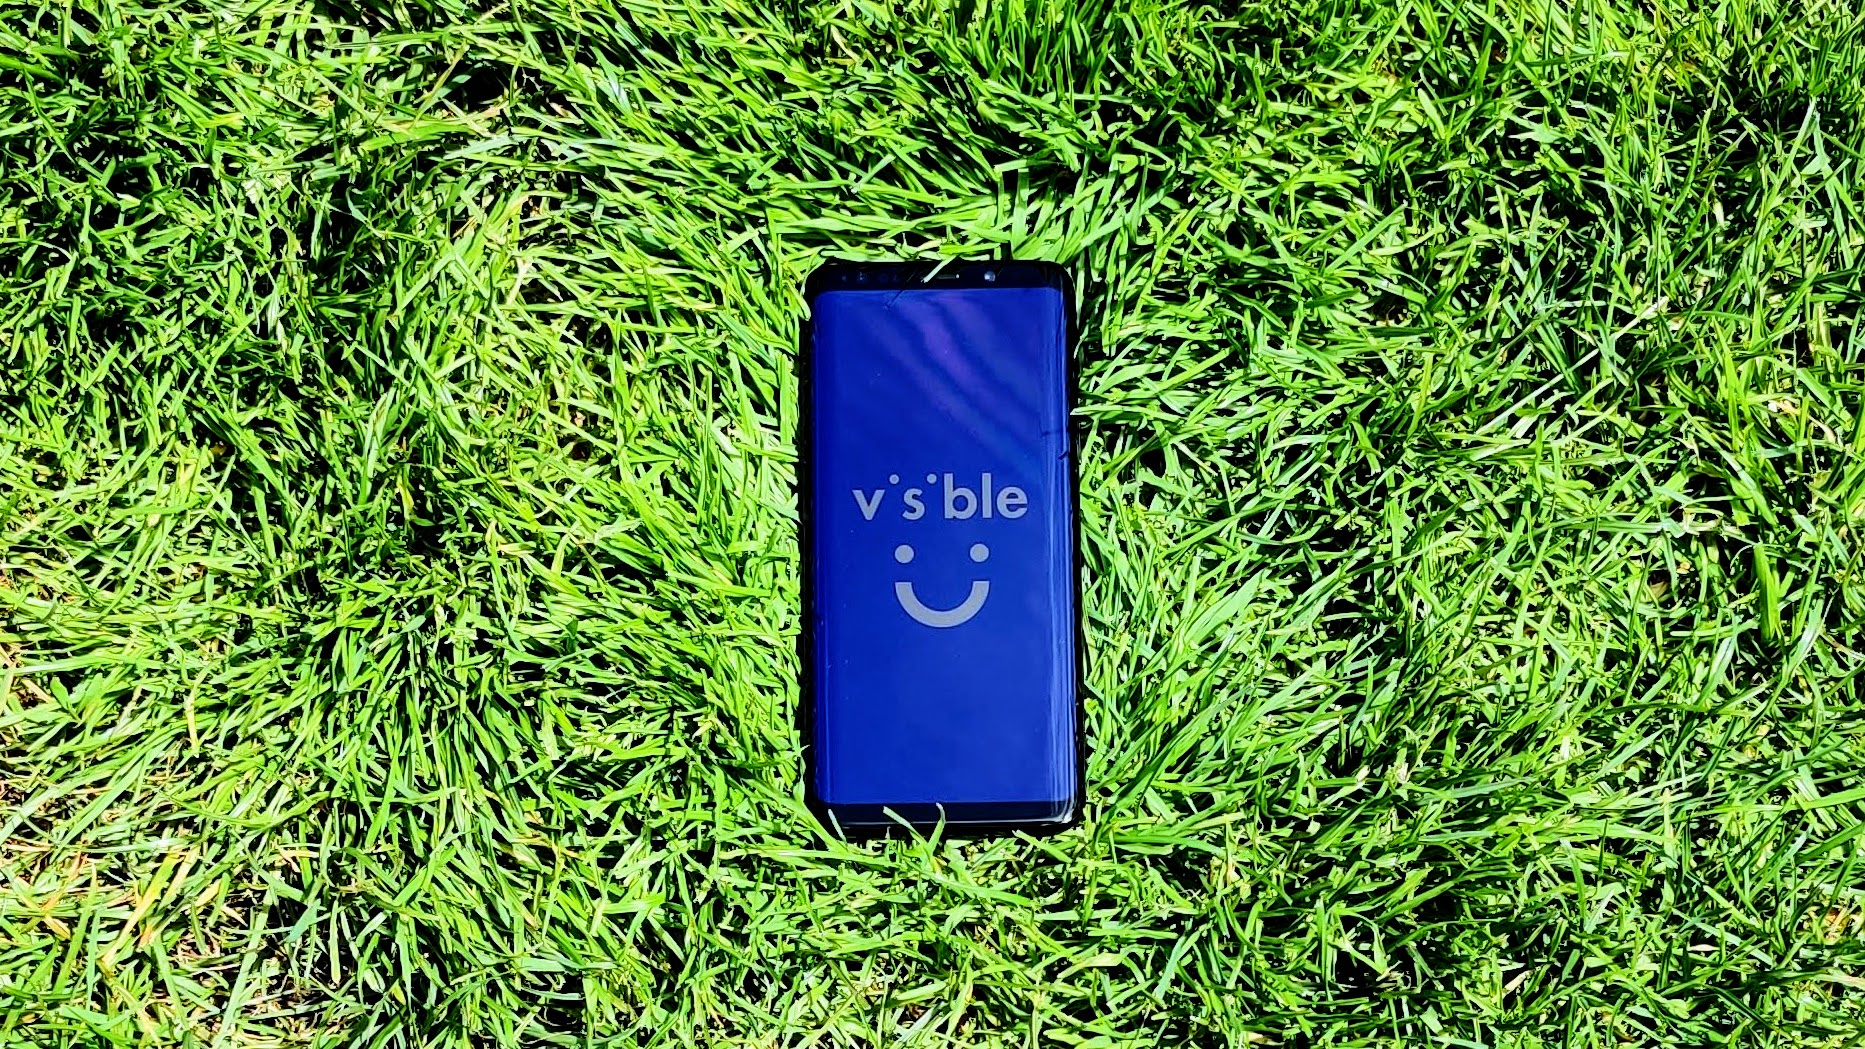 Samsung Galaxy S9 on some grass with the logo visible on the screen.